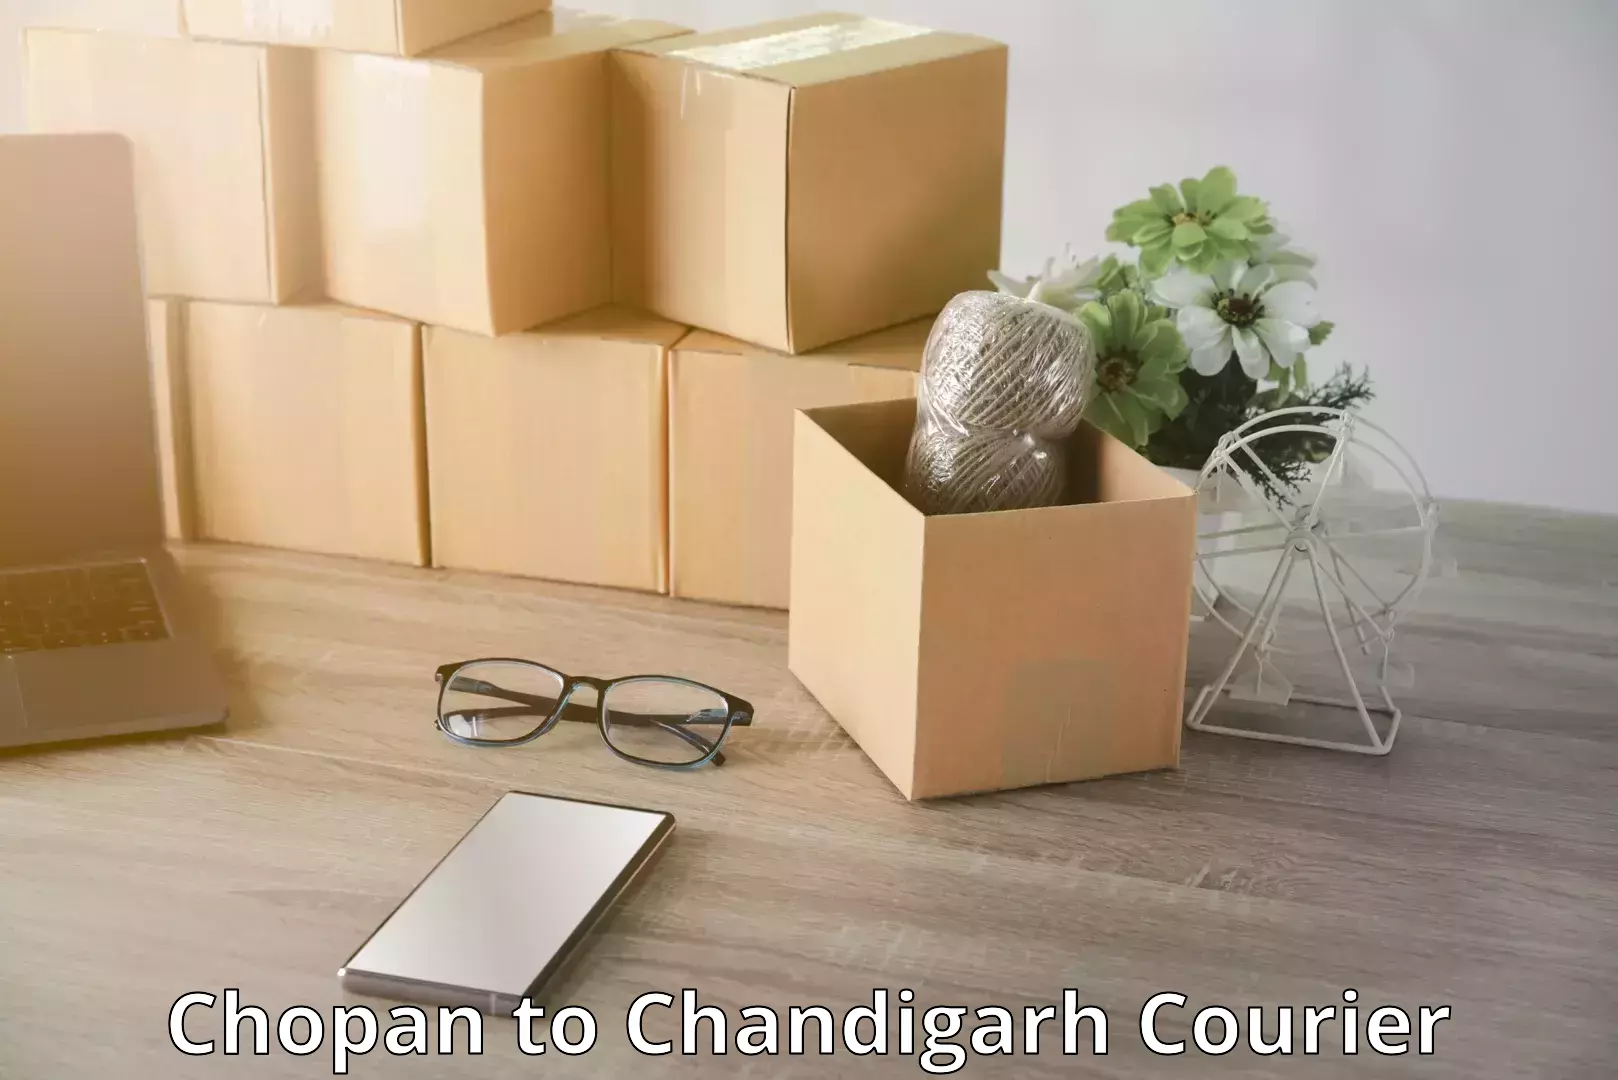 Baggage transport professionals Chopan to Chandigarh